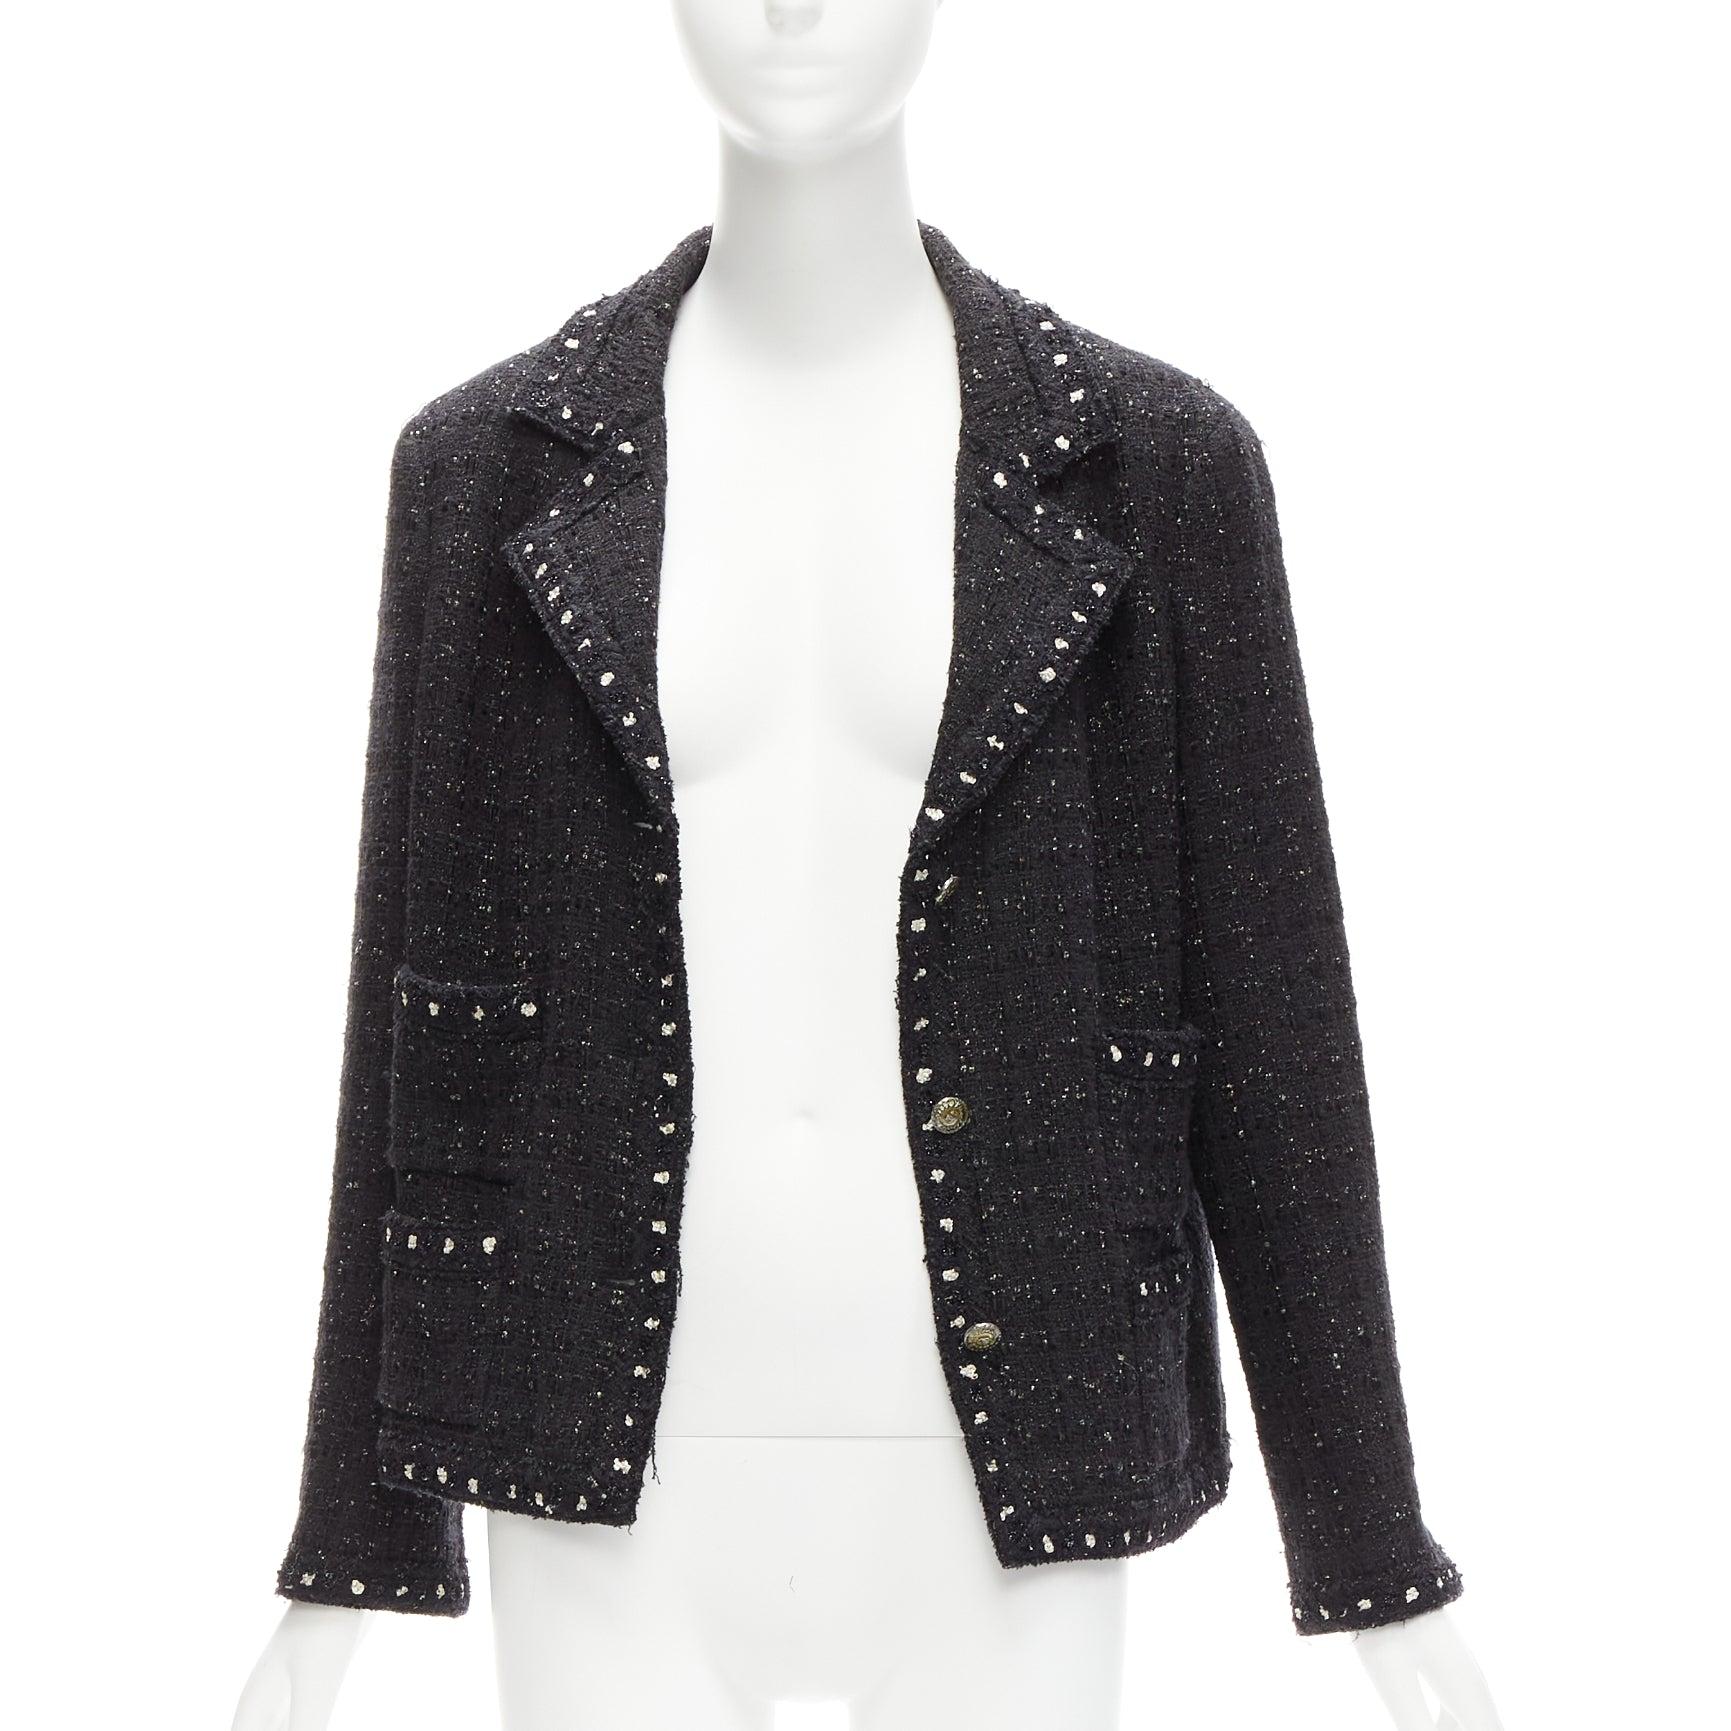 rare CHANEL 05A Fantasy Tweed CC button 4 pocket little black jacket FR44 2XL
Reference: TGAS/D00931
Brand: Chanel
Designer: Karl Lagerfeld
Model: Fantasy Tweed
Collection: 05A - Runway
Material: Tweed
Color: Black, Silver
Pattern: Tweed
Closure: